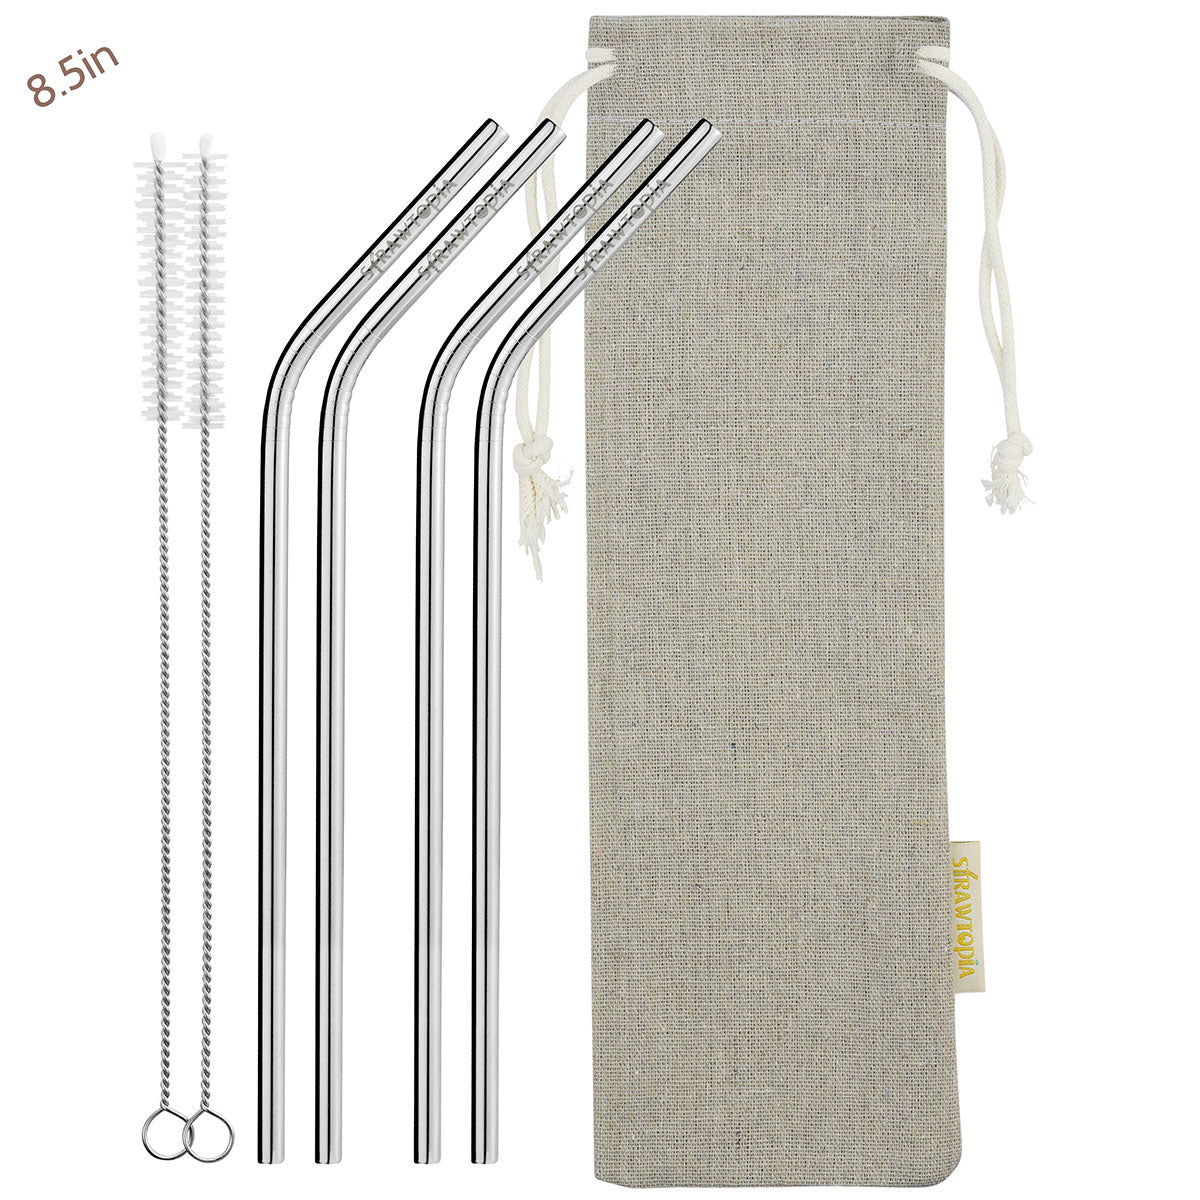 4 Pcs Reusable Metal Drinking Straws 8.5 Inch Stainless Steel